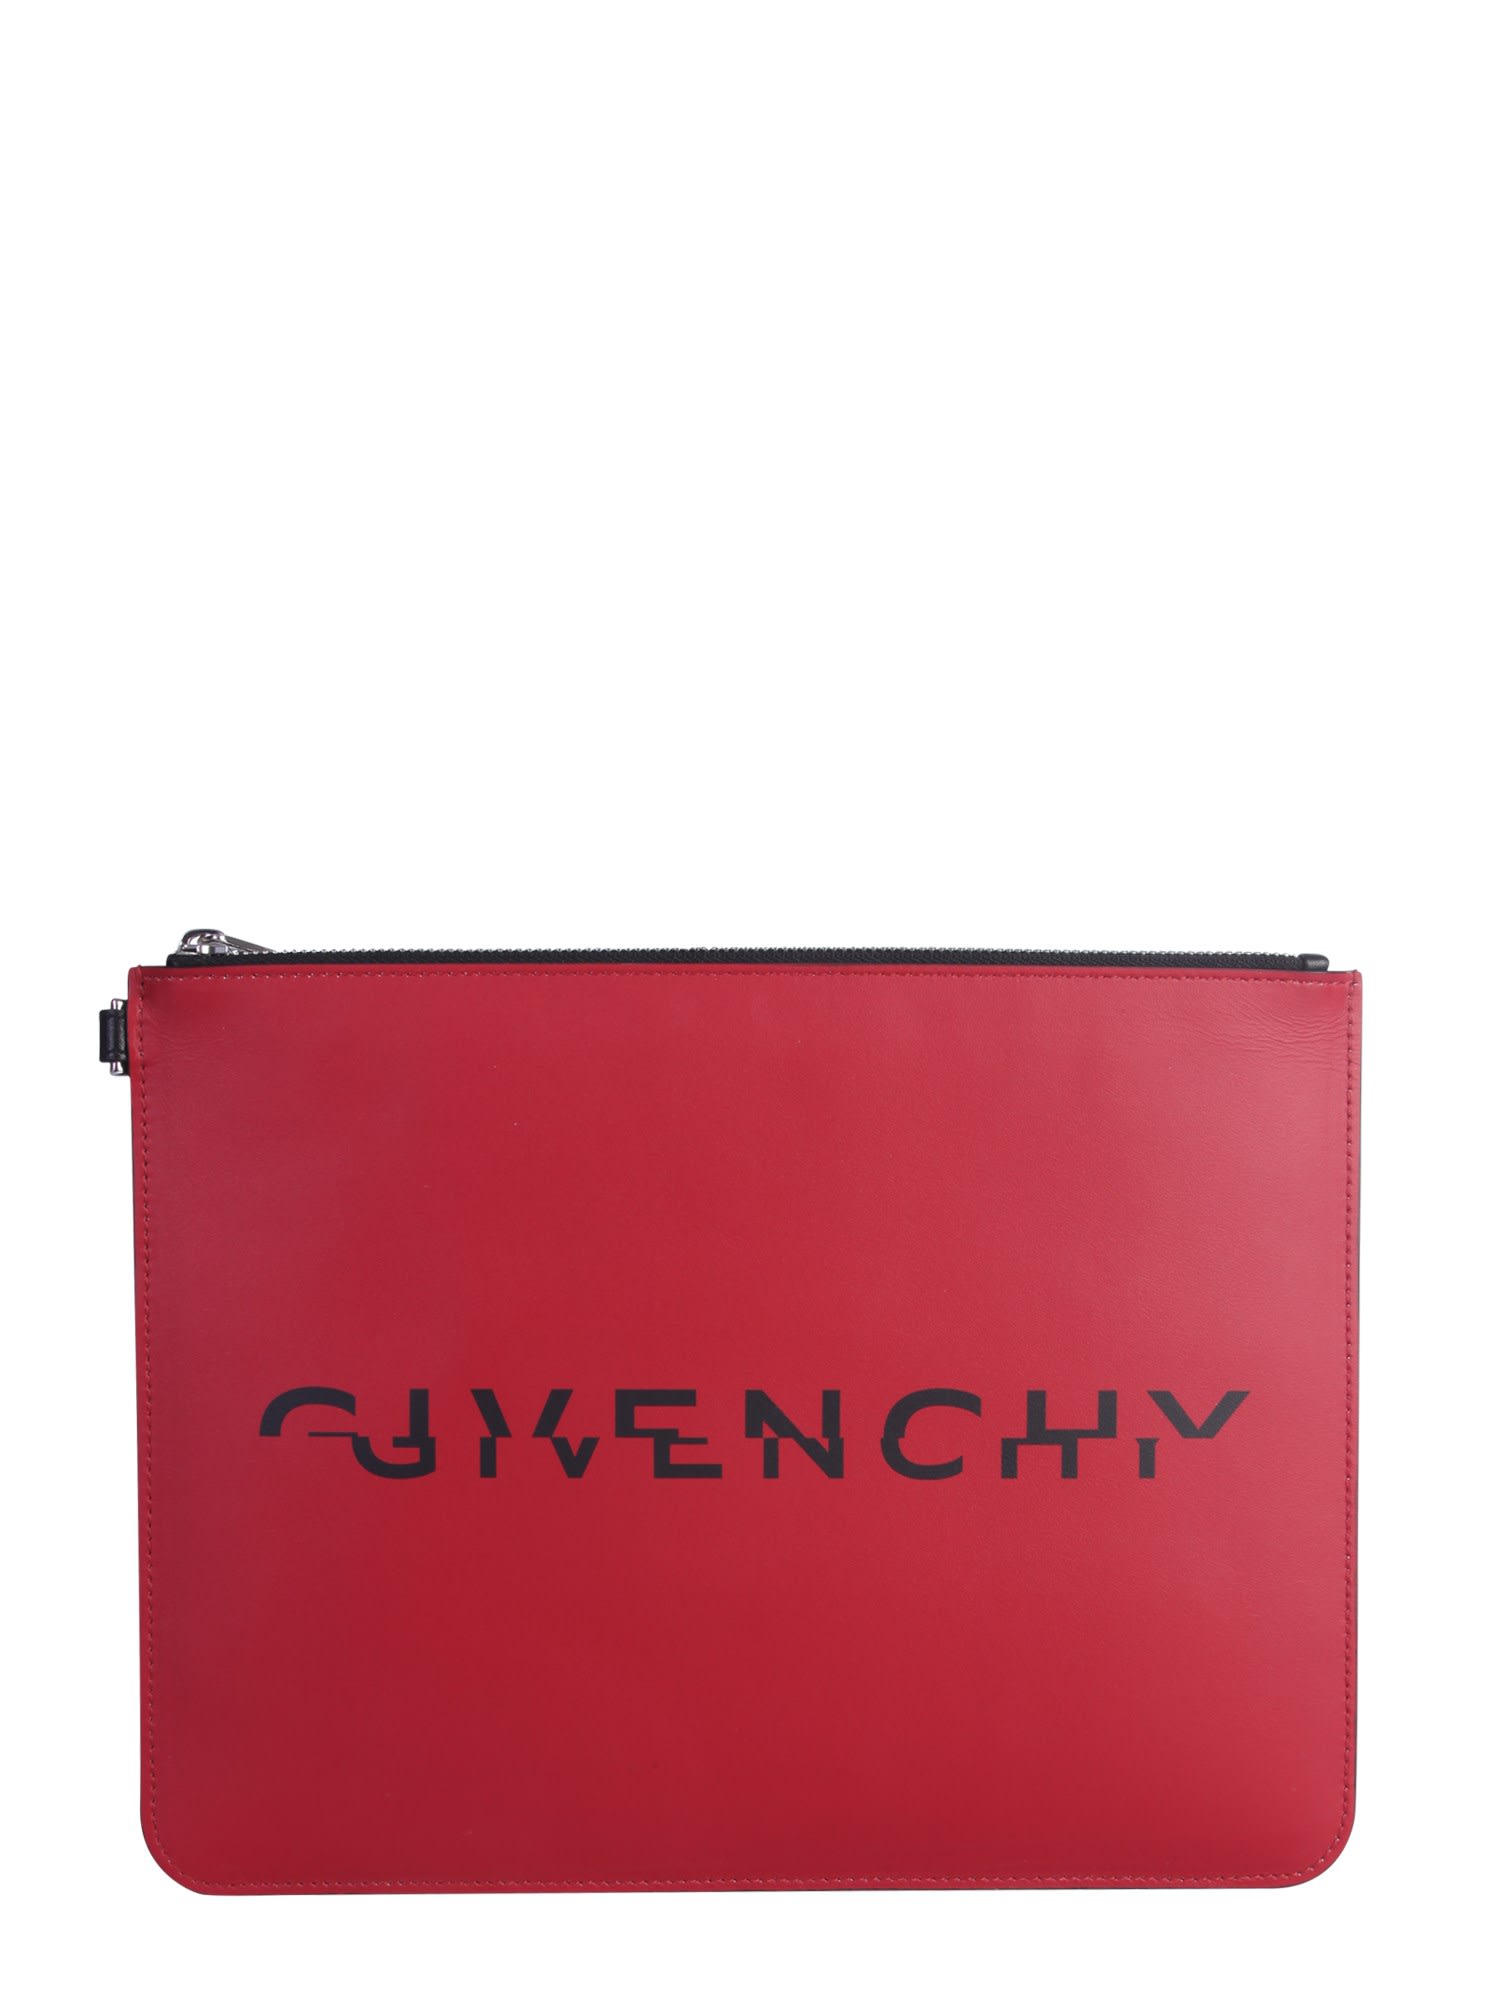 GIVENCHY POUCH WITH LOGO,11340330